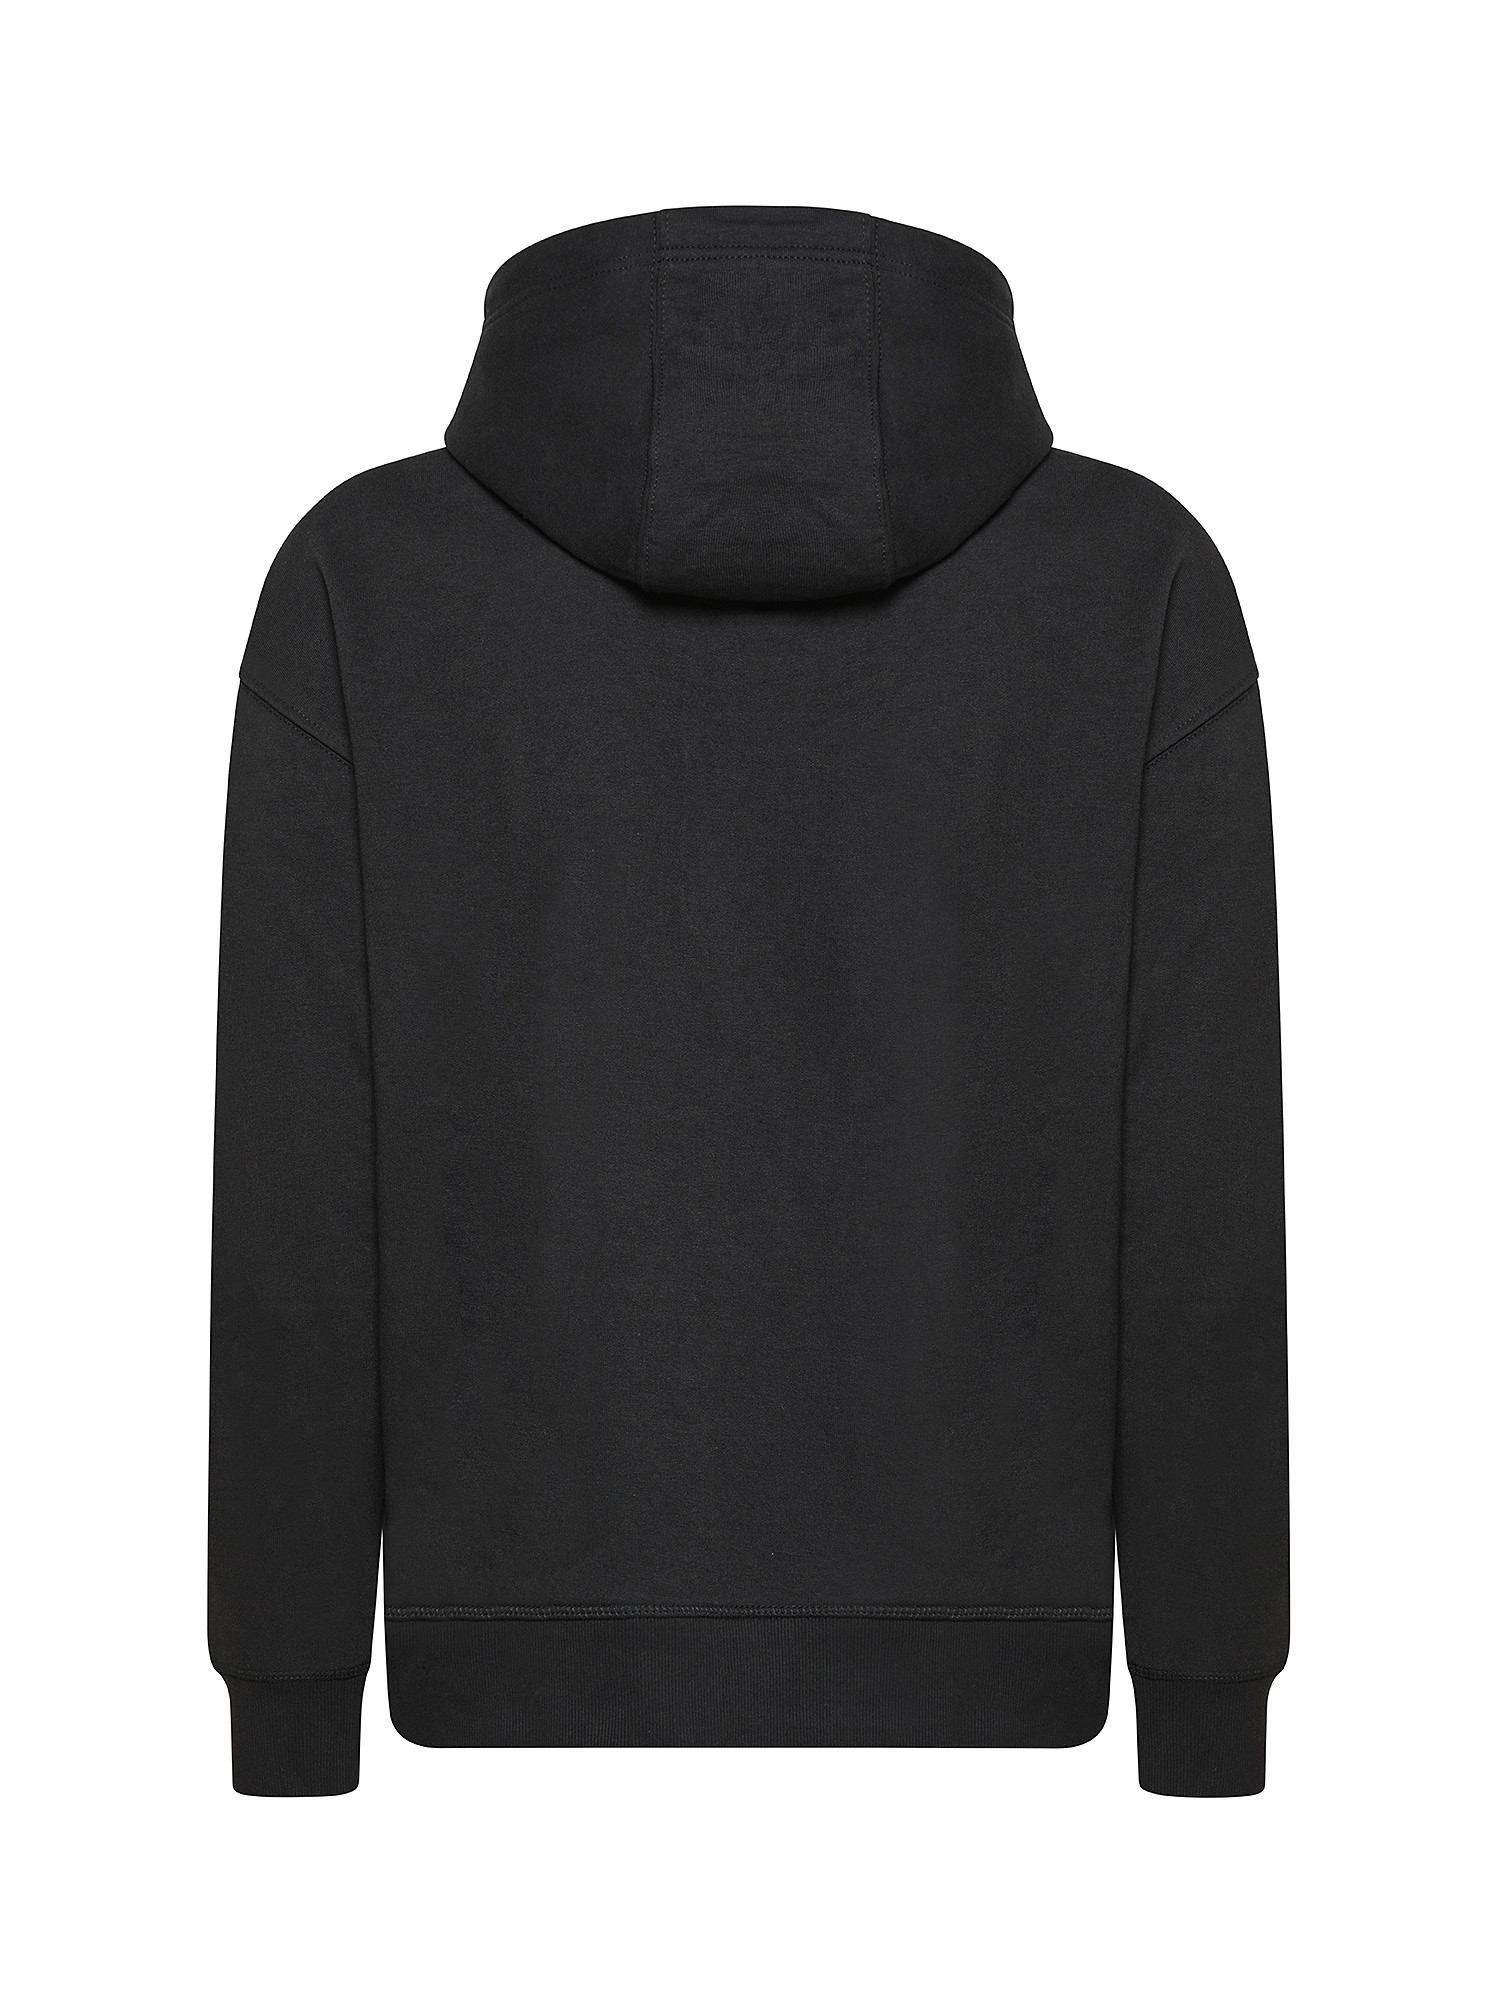 Tommy Jeans - Hooded cotton sweatshirt with micrologo, Black, large image number 1